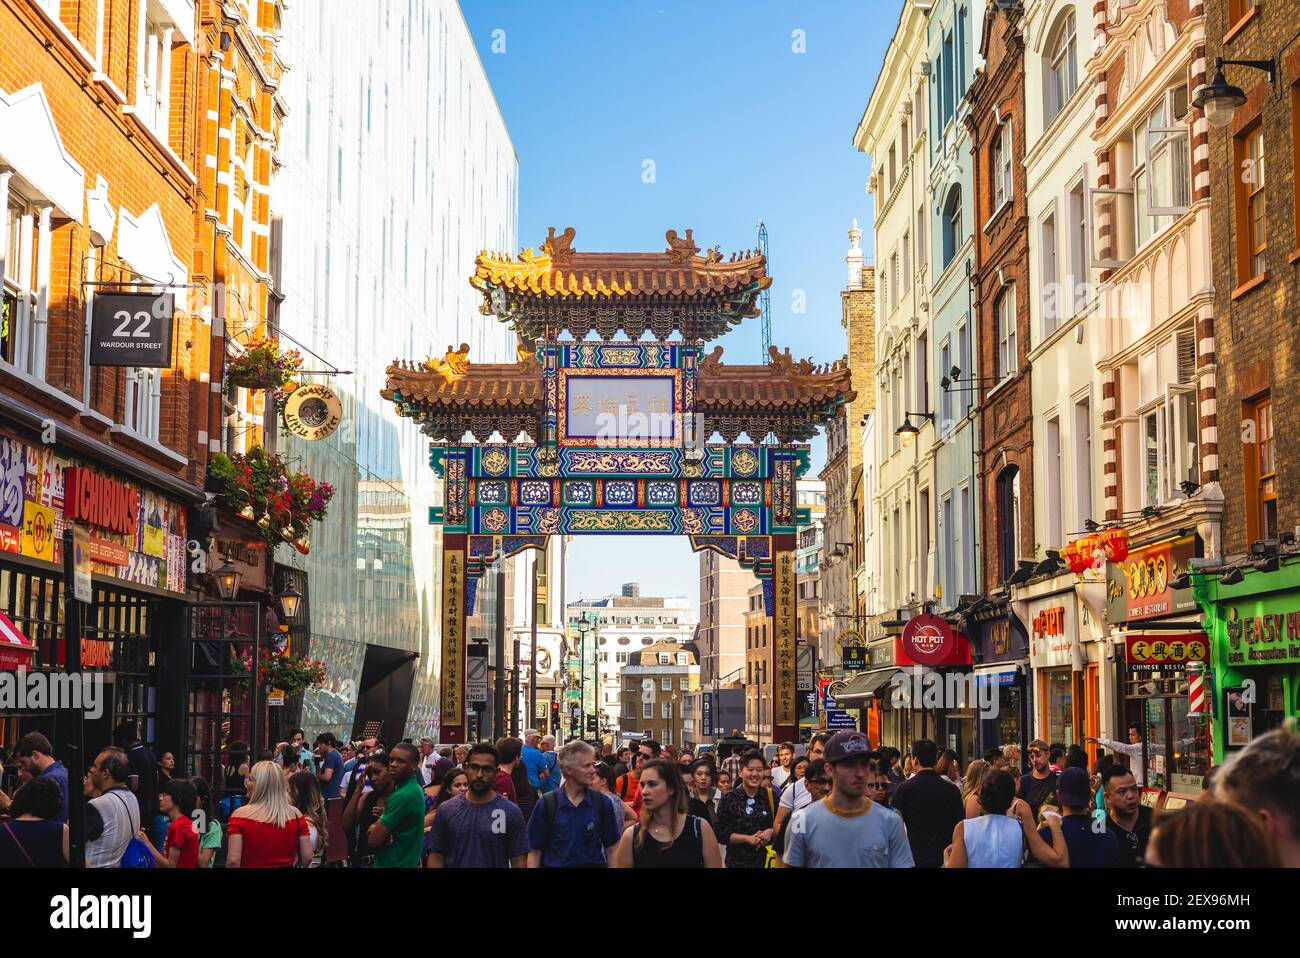 July 1, 2018: Chinatown, an ethnic enclave in the City of Westminster, London, UK.  It contains a number of Chinese restaurants, bakeries, supermarket Stock Photo